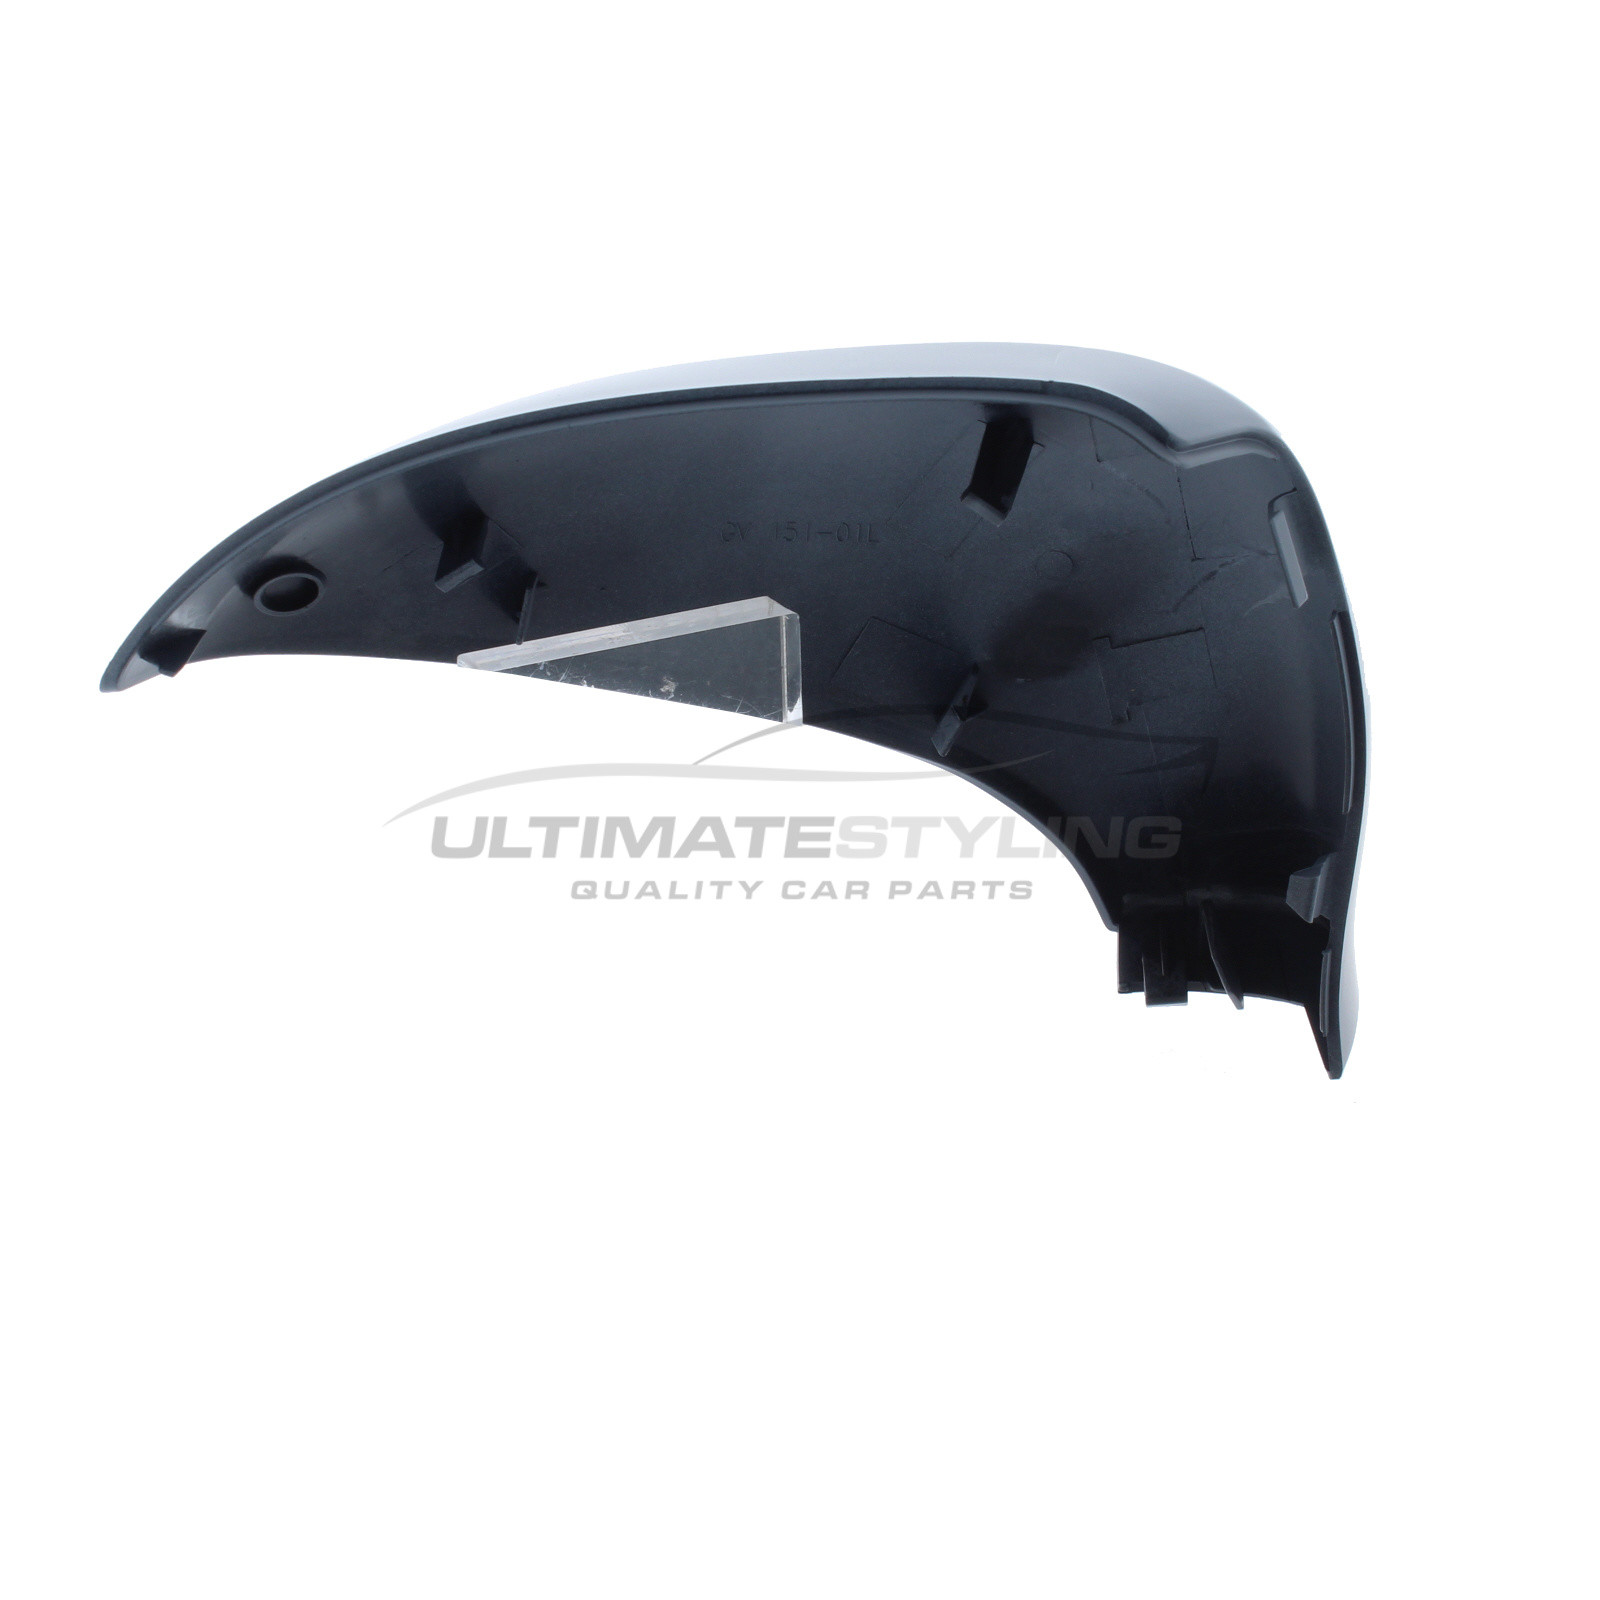 Left Side Wing Mirror Cover Cap Casing Primed Compatible With 207 2006 Onwards OEM 8152F1 9680194877 815291 